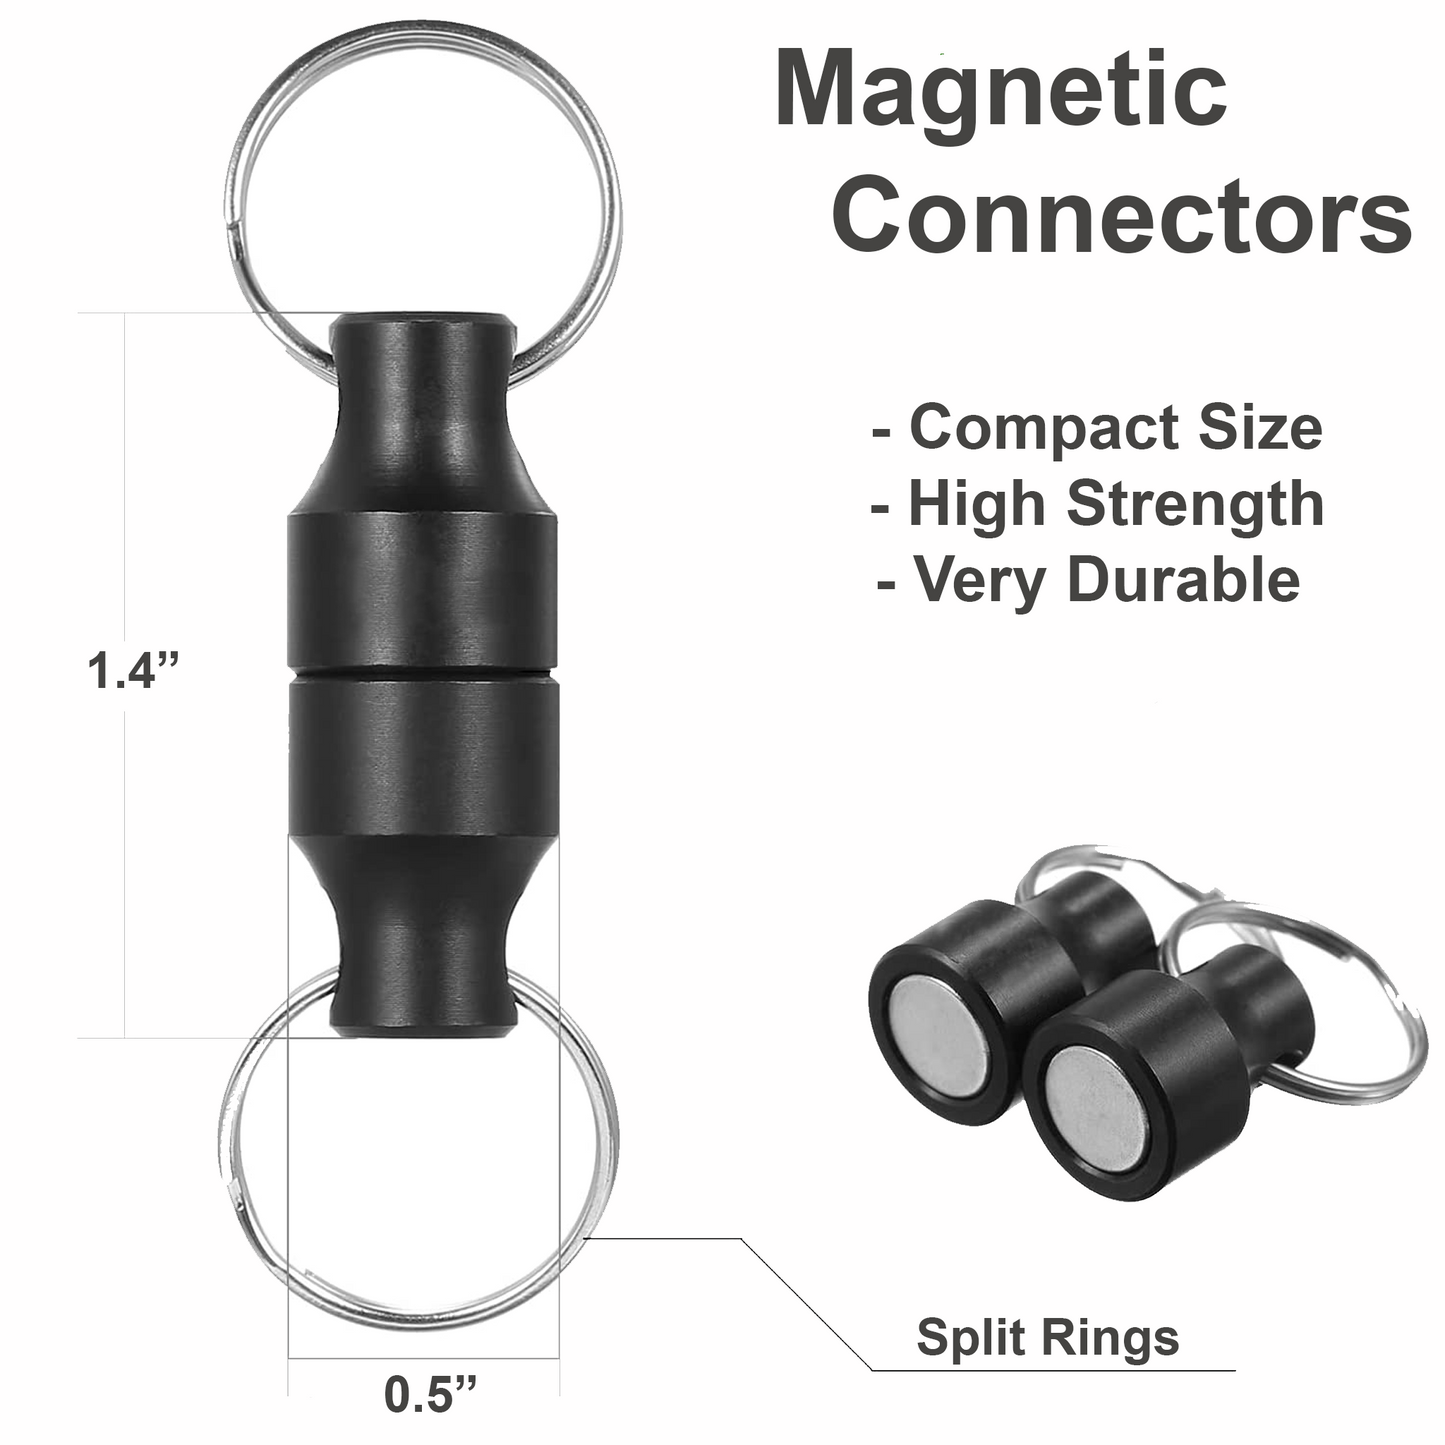 Magnactor: The Magnetic Quick-Release Connector